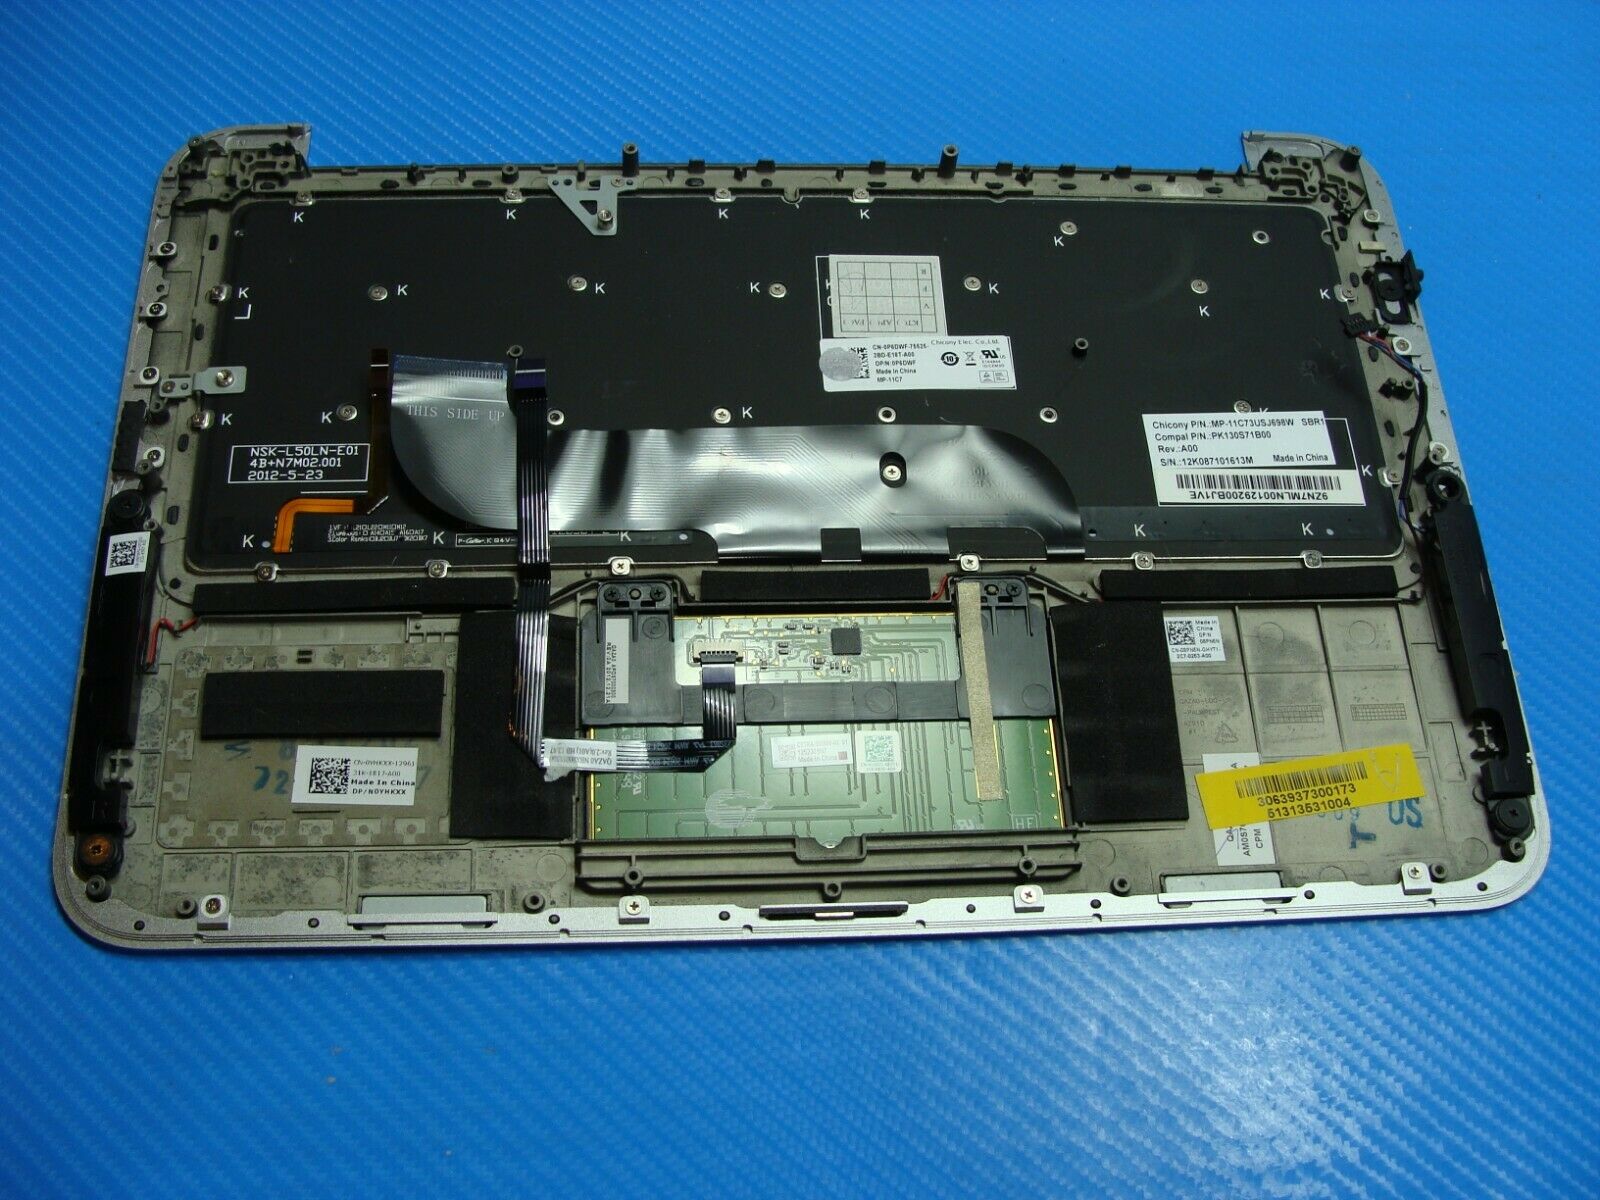 Dell XPS 12.5